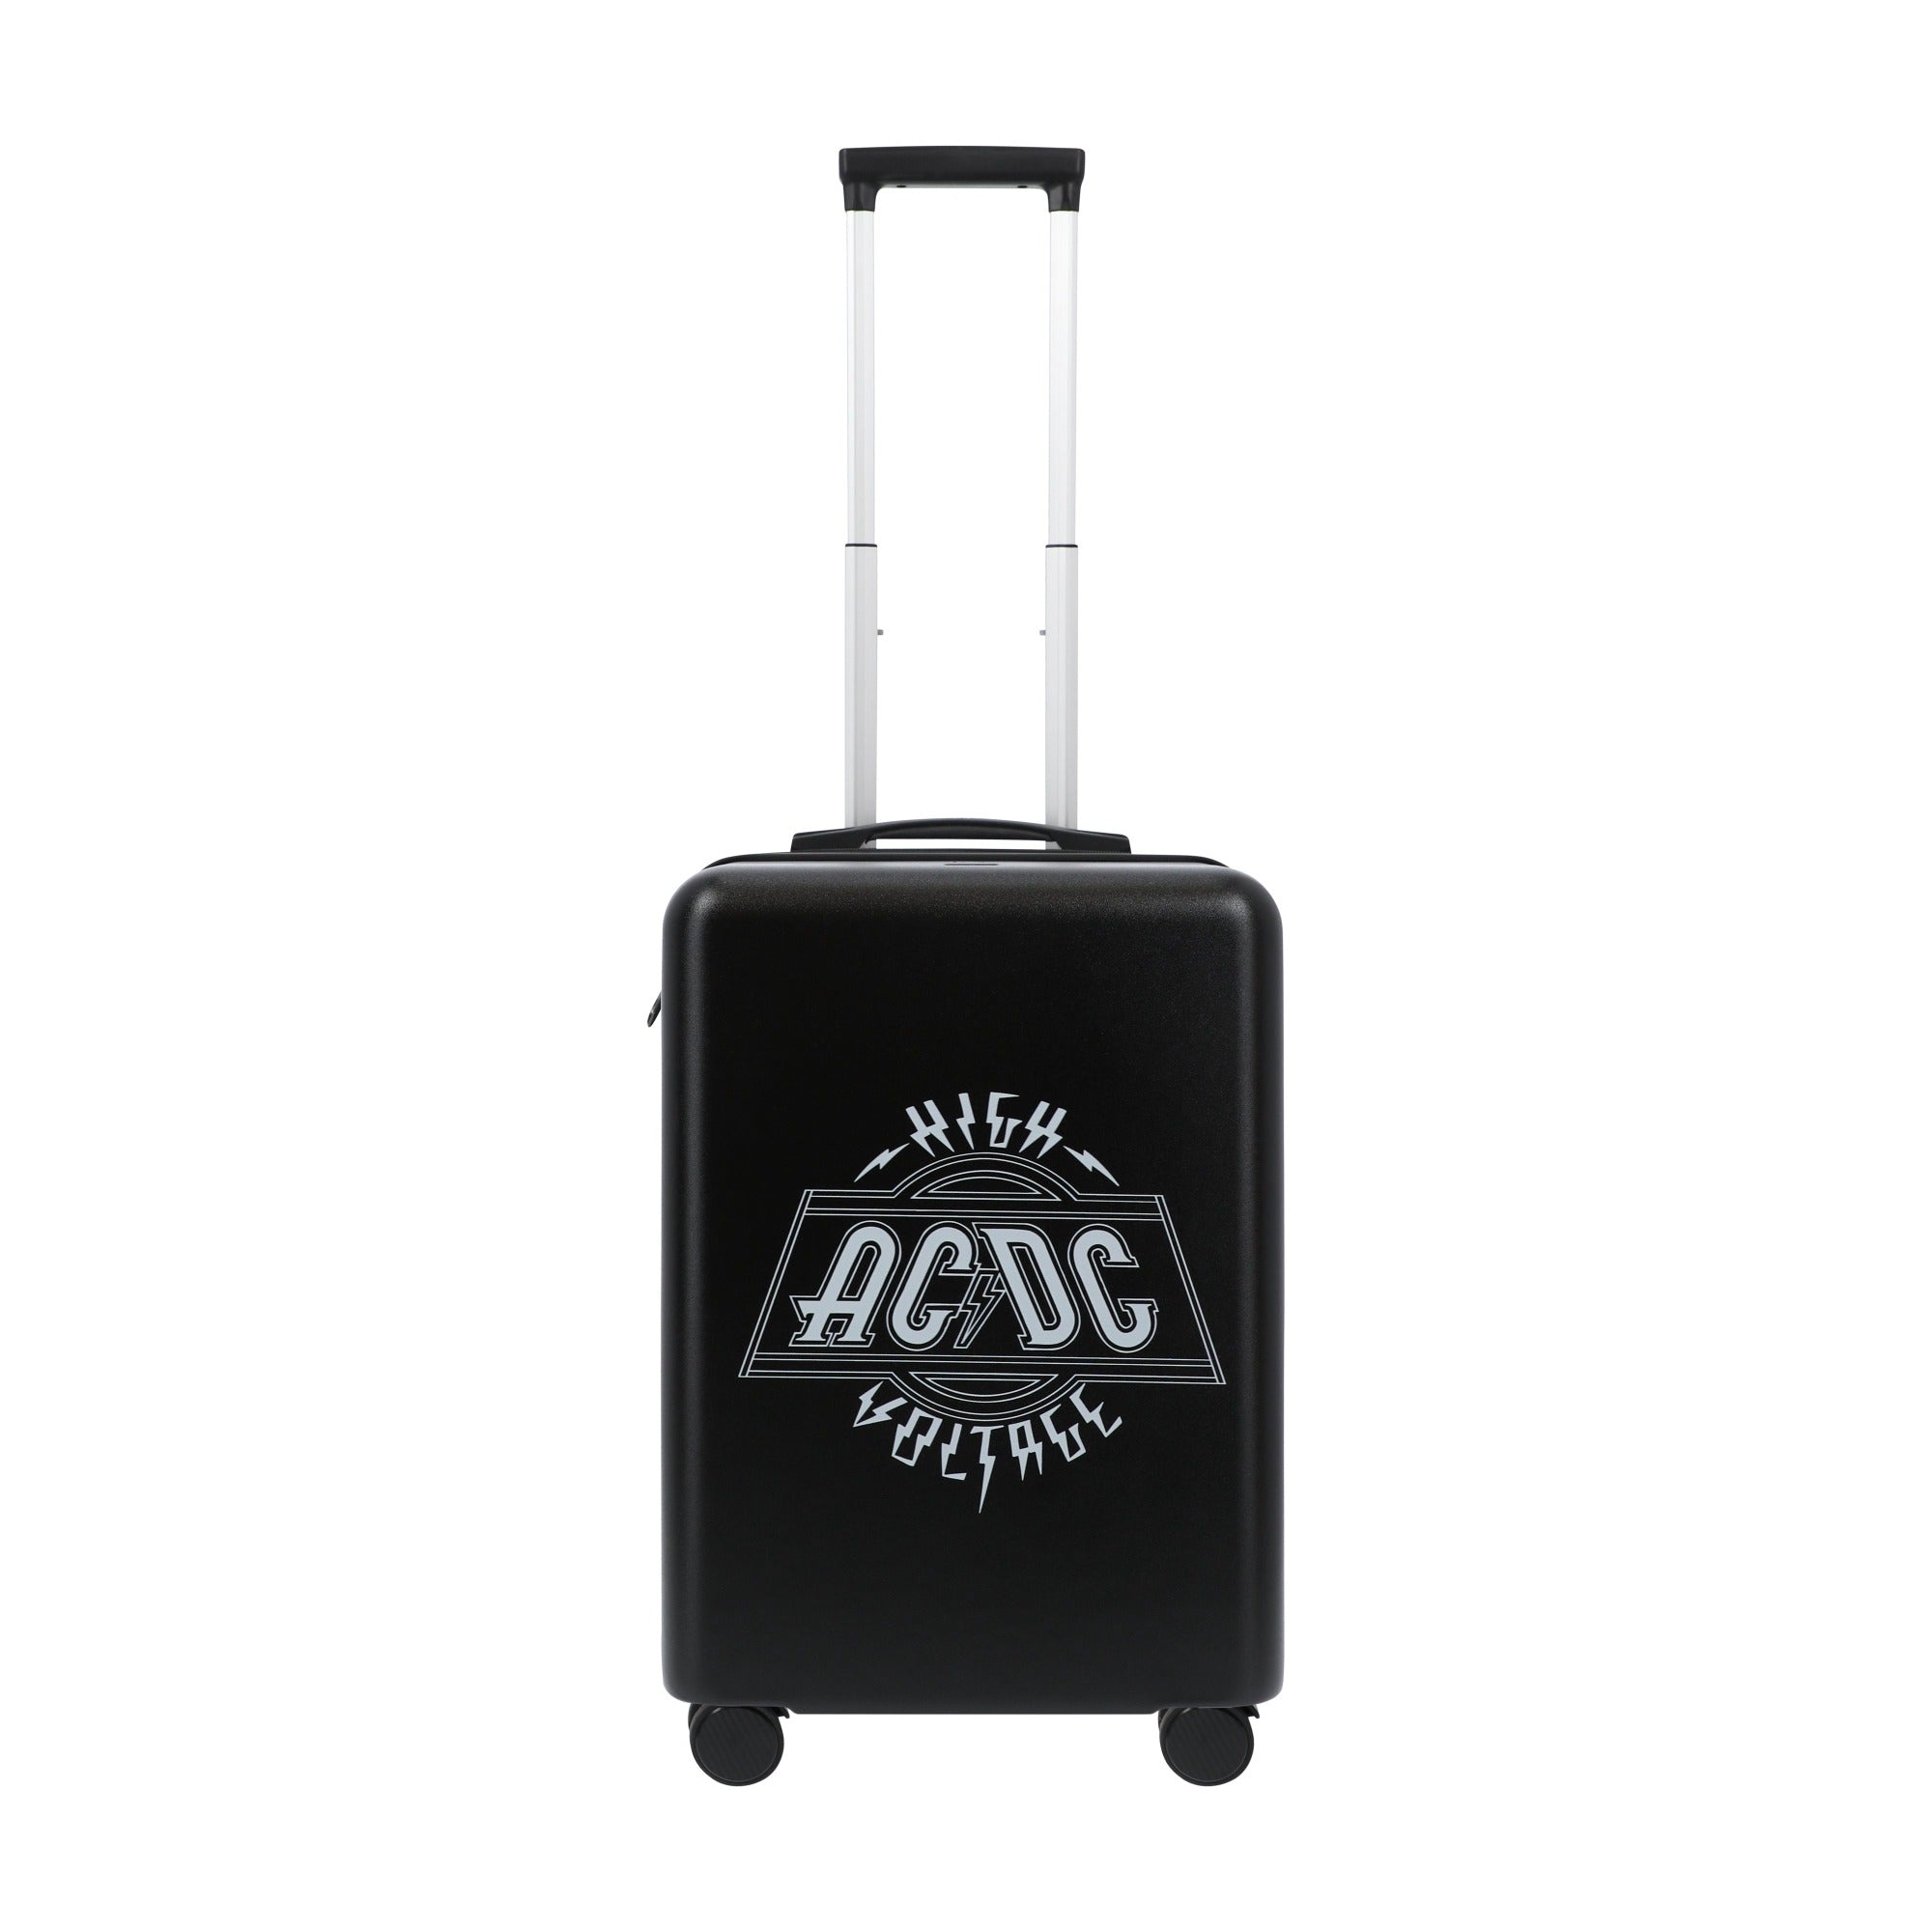 Black AC/DC 22.5" spinner suitcase carry-on luggage hardsided by Ful